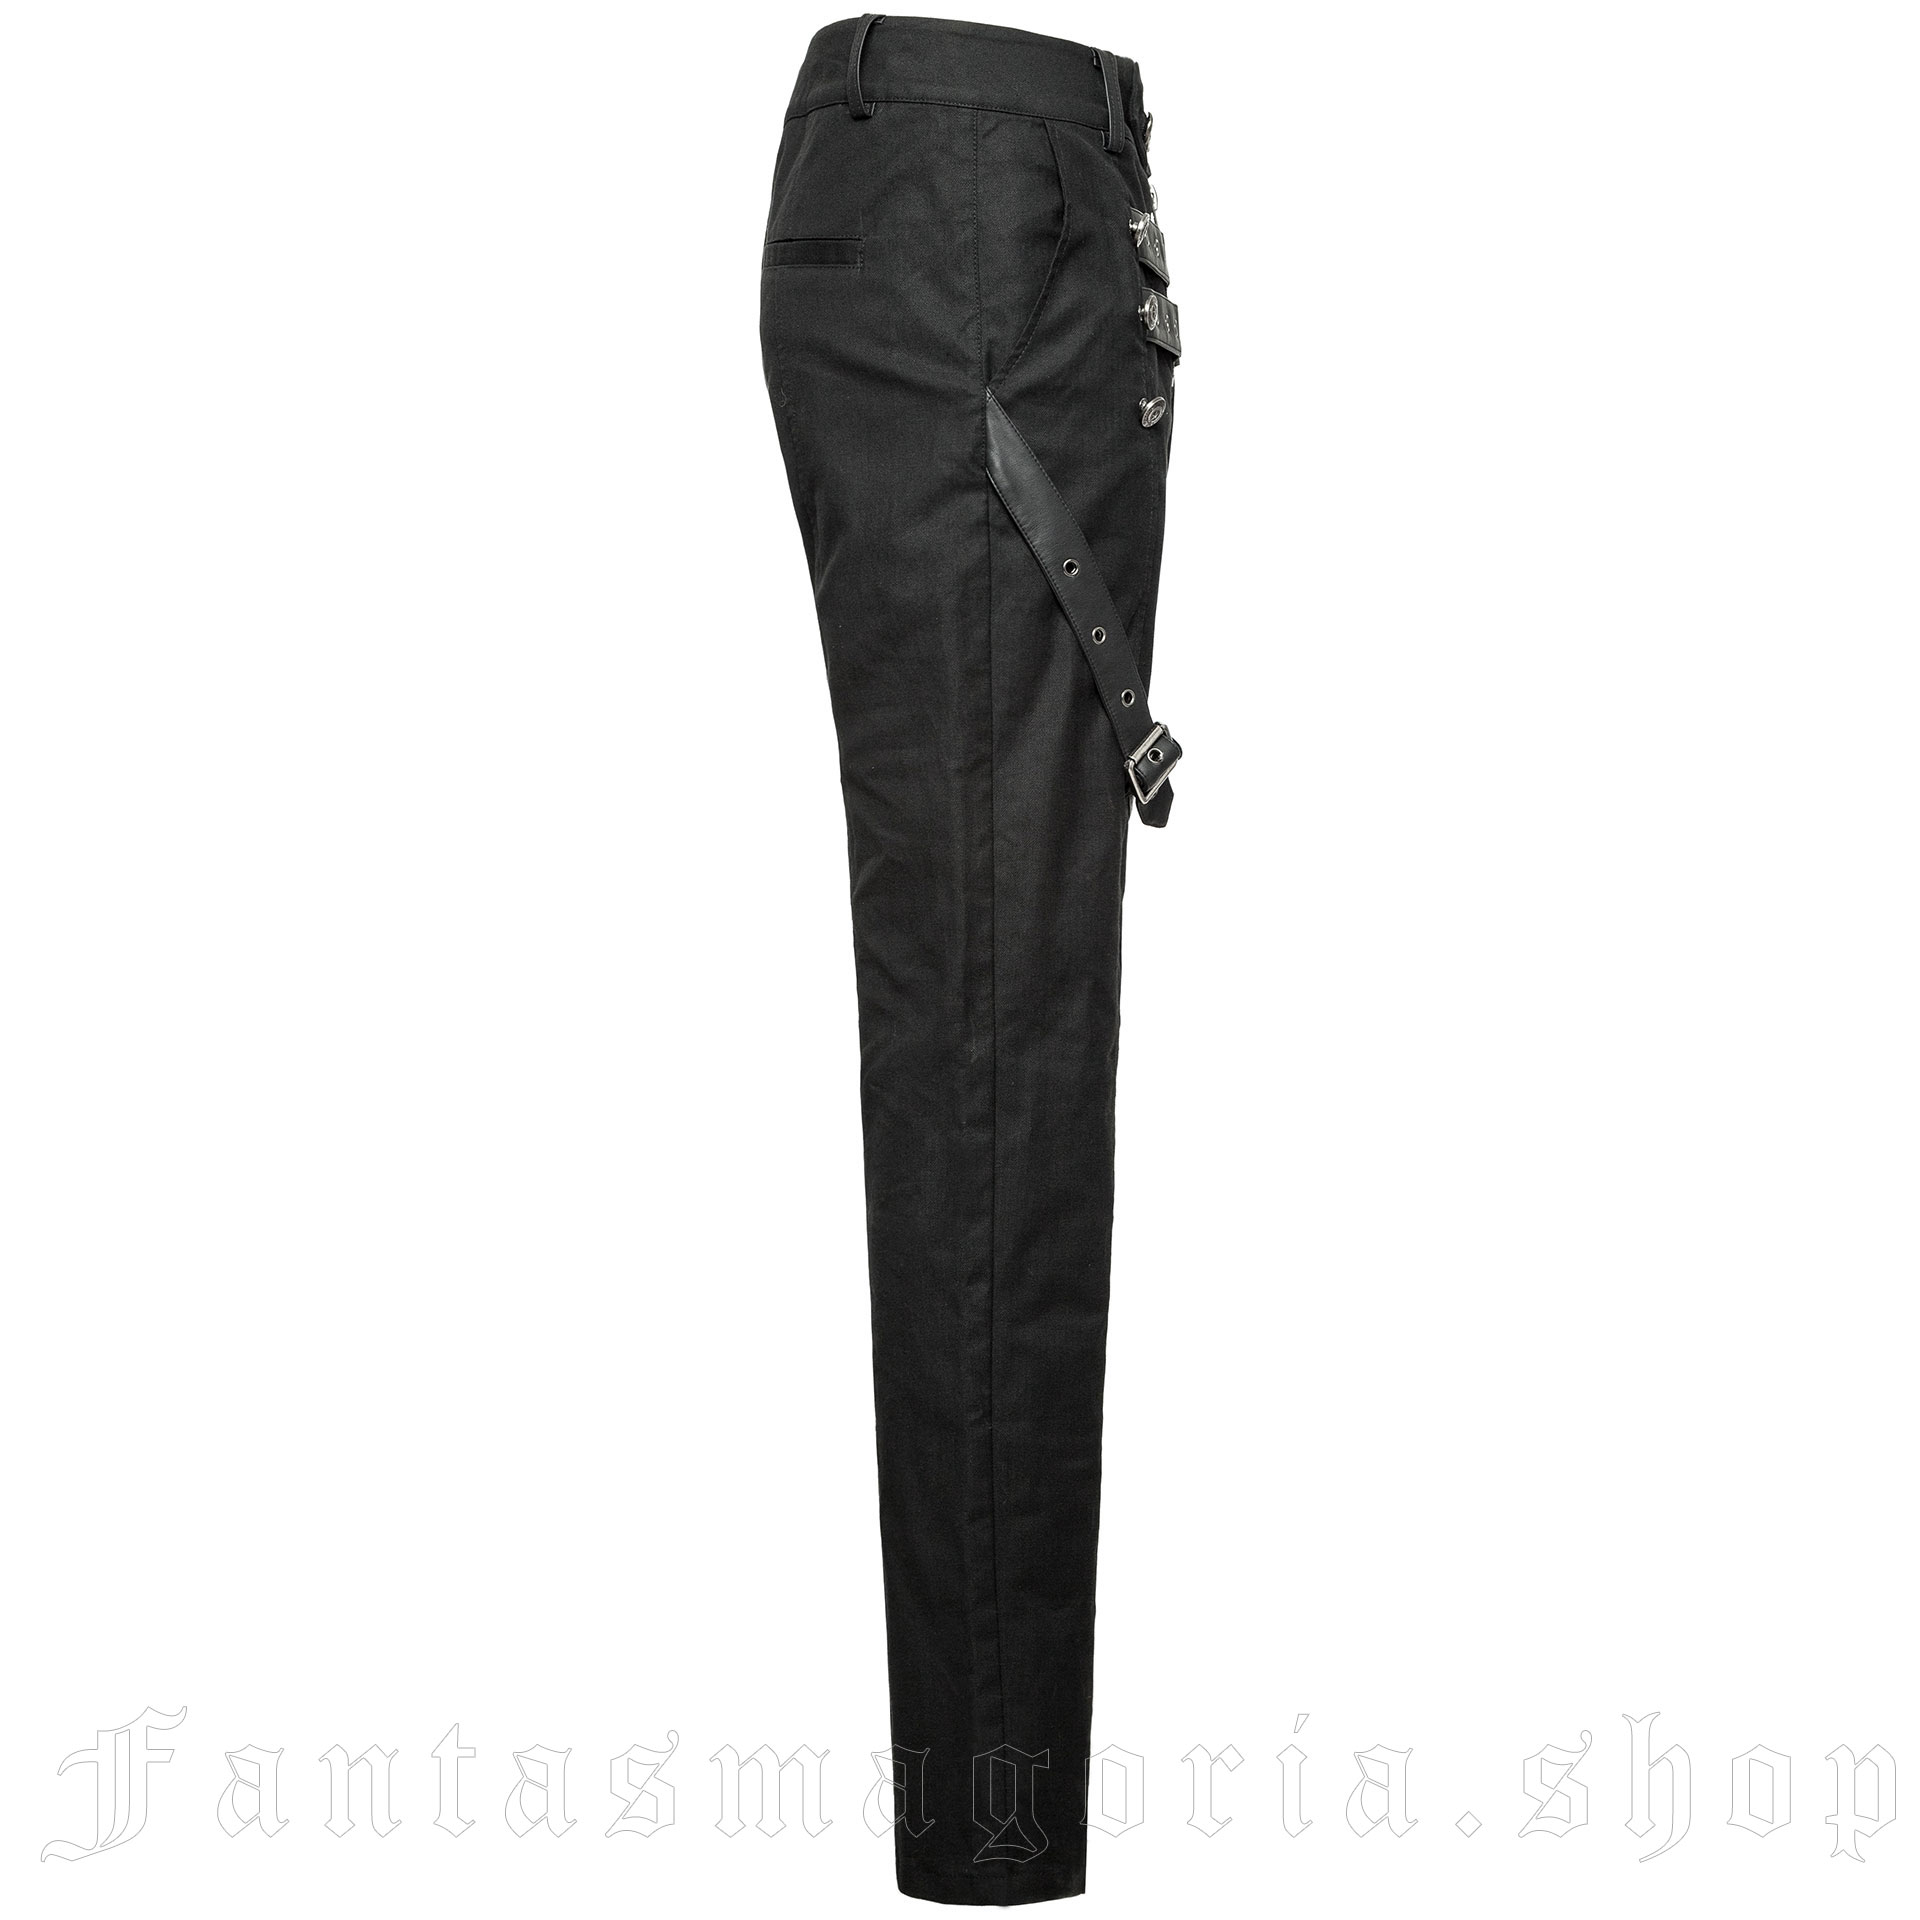 Aries Trousers by Punk Rave brand